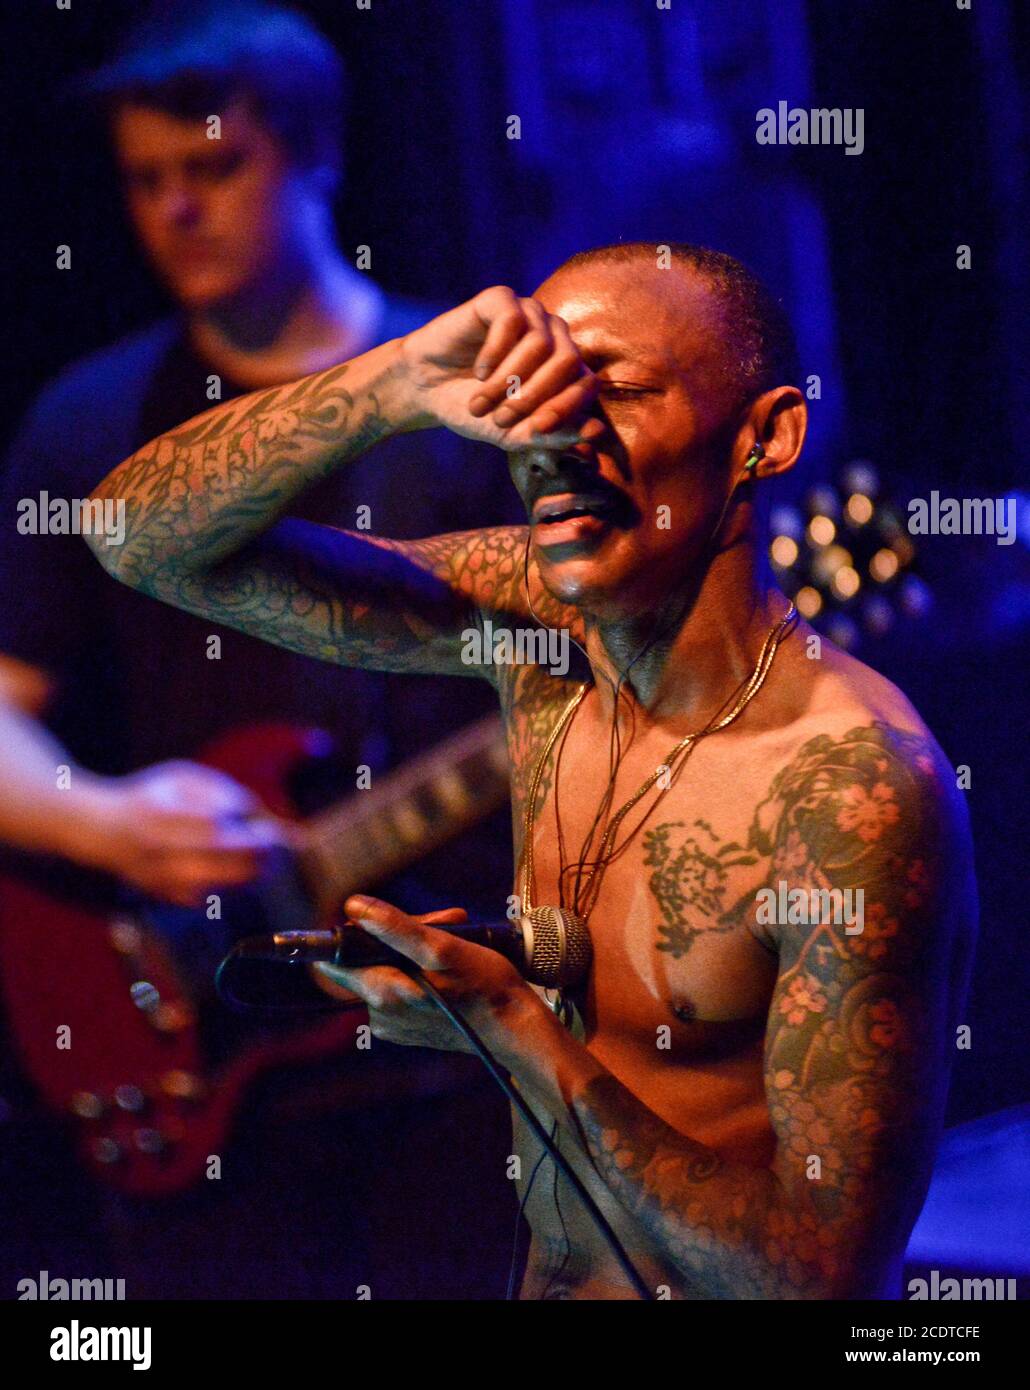 Tricky performing live Stock Photo